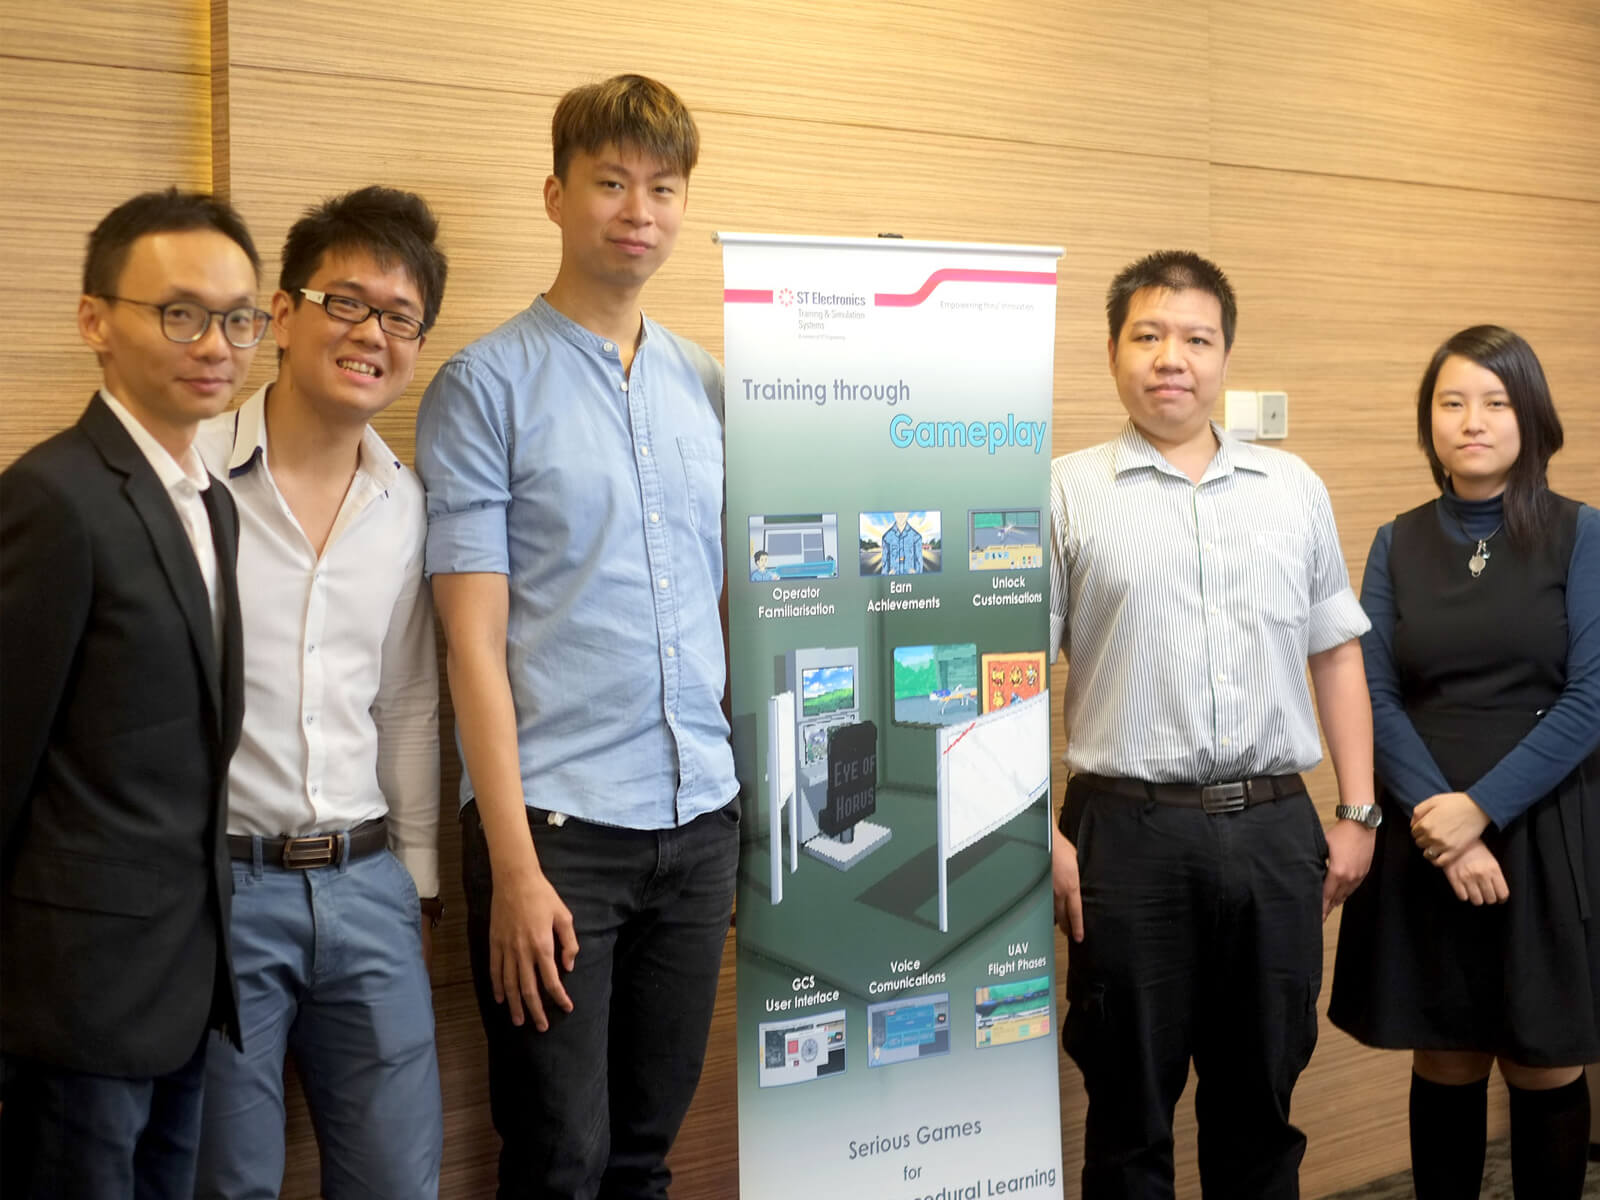 Team from ST Electronics poses for a photo with a vertical banner explaining a learning initiative using gameplay mechanics